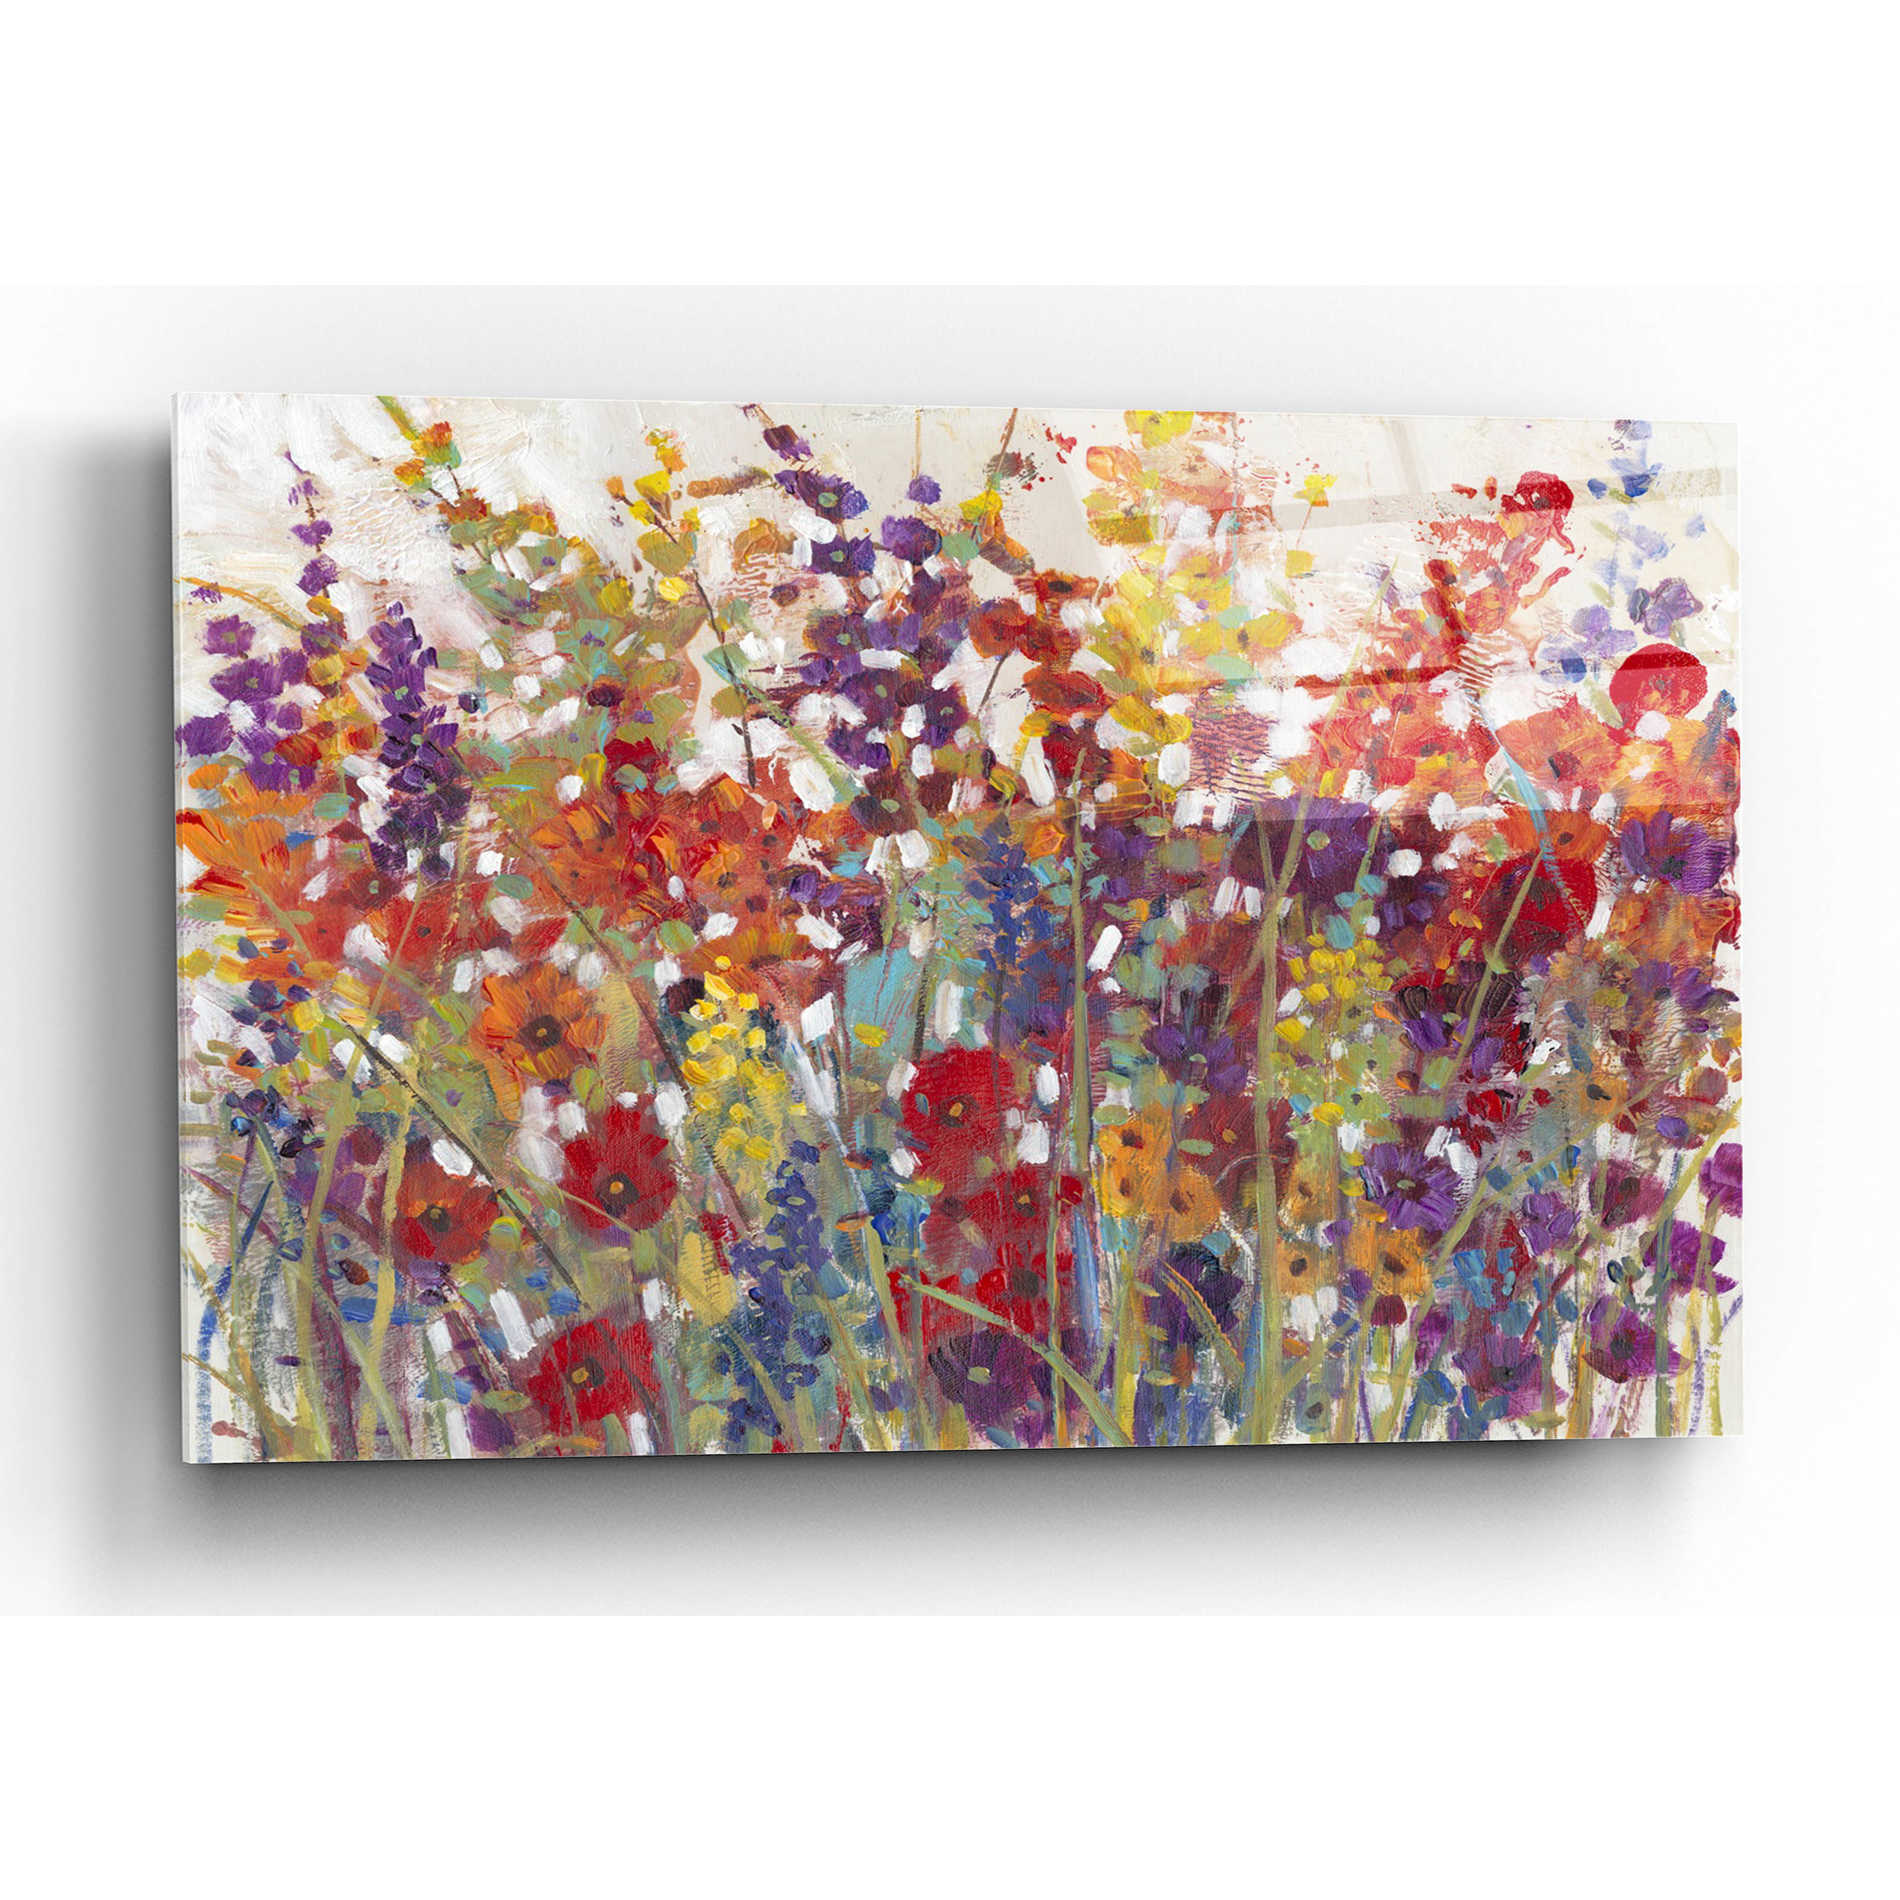 Epic Art 'Variety of Flowers II' by Tim O'Toole, Acrylic Glass Wall Art,16x12